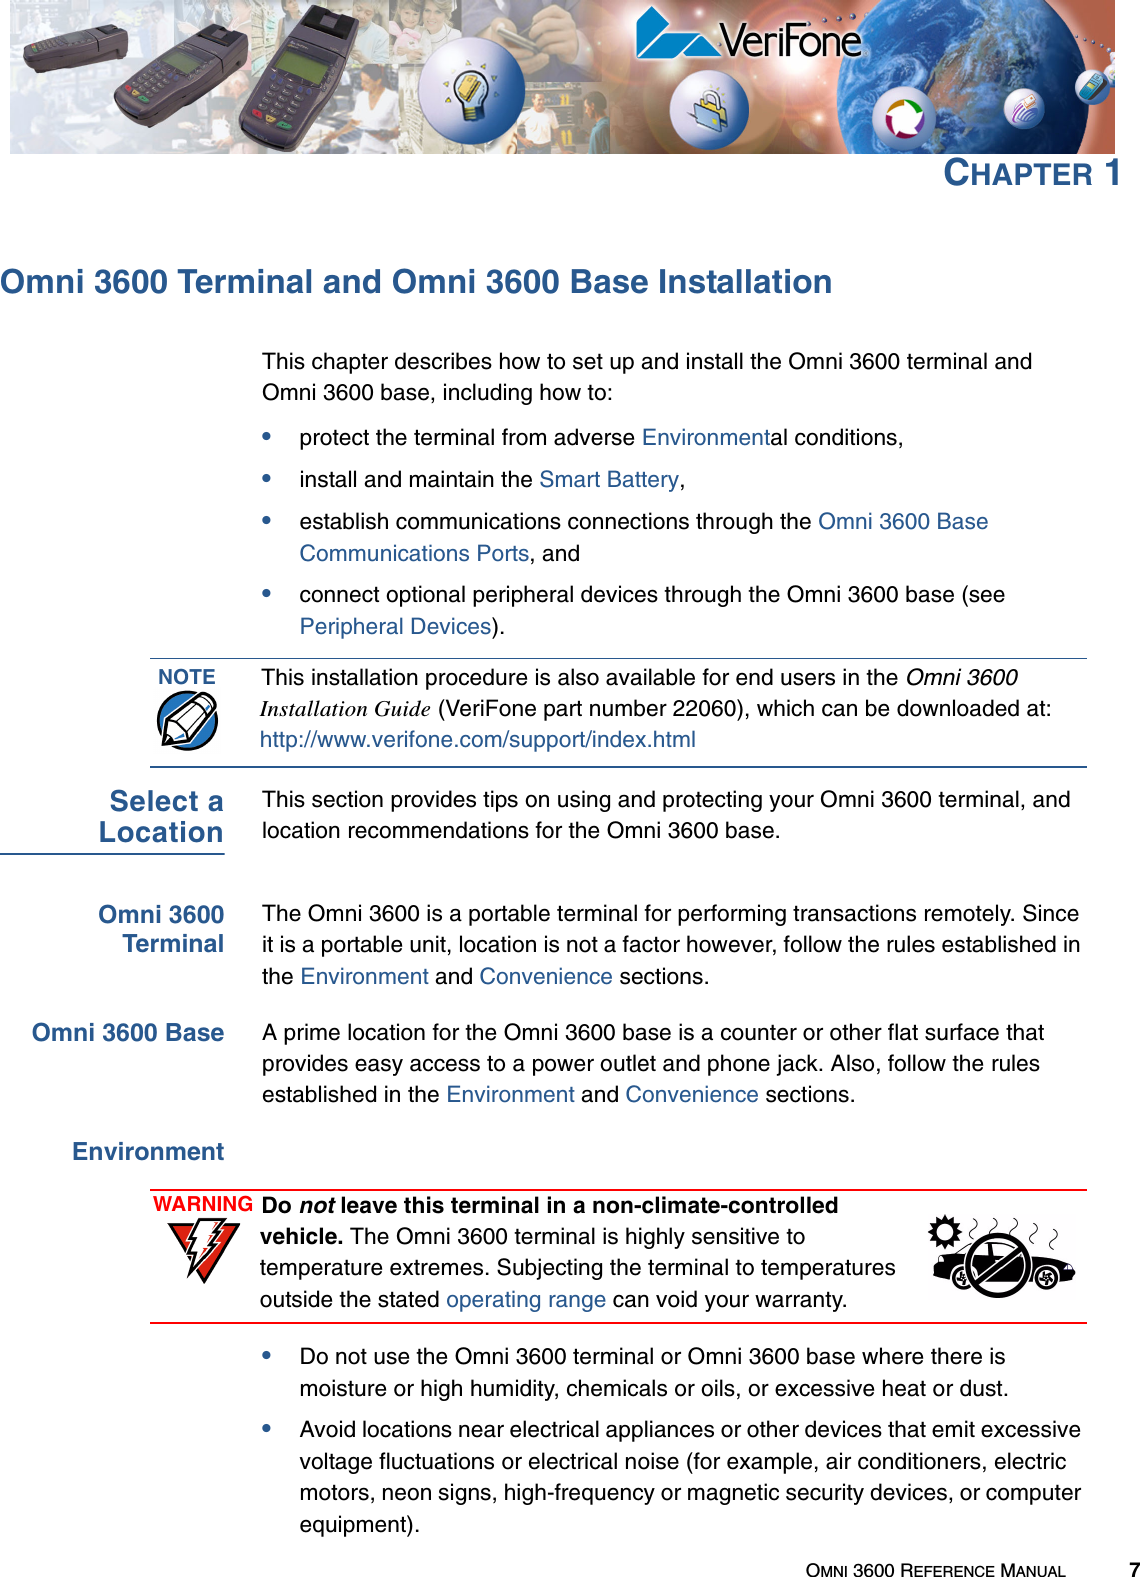 OMNI 3600 REFERENCE MANUAL 7CHAPTER 1Omni 3600 Terminal and Omni 3600 Base InstallationThis chapter describes how to set up and install the Omni 3600 terminal and Omni 3600 base, including how to:•protect the terminal from adverse Environmental conditions,•install and maintain the Smart Battery,•establish communications connections through the Omni 3600 Base Communications Ports, and •connect optional peripheral devices through the Omni 3600 base (see Peripheral Devices).Select aLocationThis section provides tips on using and protecting your Omni 3600 terminal, and location recommendations for the Omni 3600 base.Omni 3600TerminalThe Omni 3600 is a portable terminal for performing transactions remotely. Since it is a portable unit, location is not a factor however, follow the rules established in the Environment and Convenience sections.Omni 3600 Base A prime location for the Omni 3600 base is a counter or other flat surface that provides easy access to a power outlet and phone jack. Also, follow the rules established in the Environment and Convenience sections.Environment•Do not use the Omni 3600 terminal or Omni 3600 base where there is moisture or high humidity, chemicals or oils, or excessive heat or dust.•Avoid locations near electrical appliances or other devices that emit excessive voltage fluctuations or electrical noise (for example, air conditioners, electric motors, neon signs, high-frequency or magnetic security devices, or computer equipment).NOTE This installation procedure is also available for end users in the Omni 3600 Installation Guide (VeriFone part number 22060), which can be downloaded at:http://www.verifone.com/support/index.html WARNING Do not leave this terminal in a non-climate-controlled vehicle. The Omni 3600 terminal is highly sensitive to temperature extremes. Subjecting the terminal to temperatures outside the stated operating range can void your warranty.